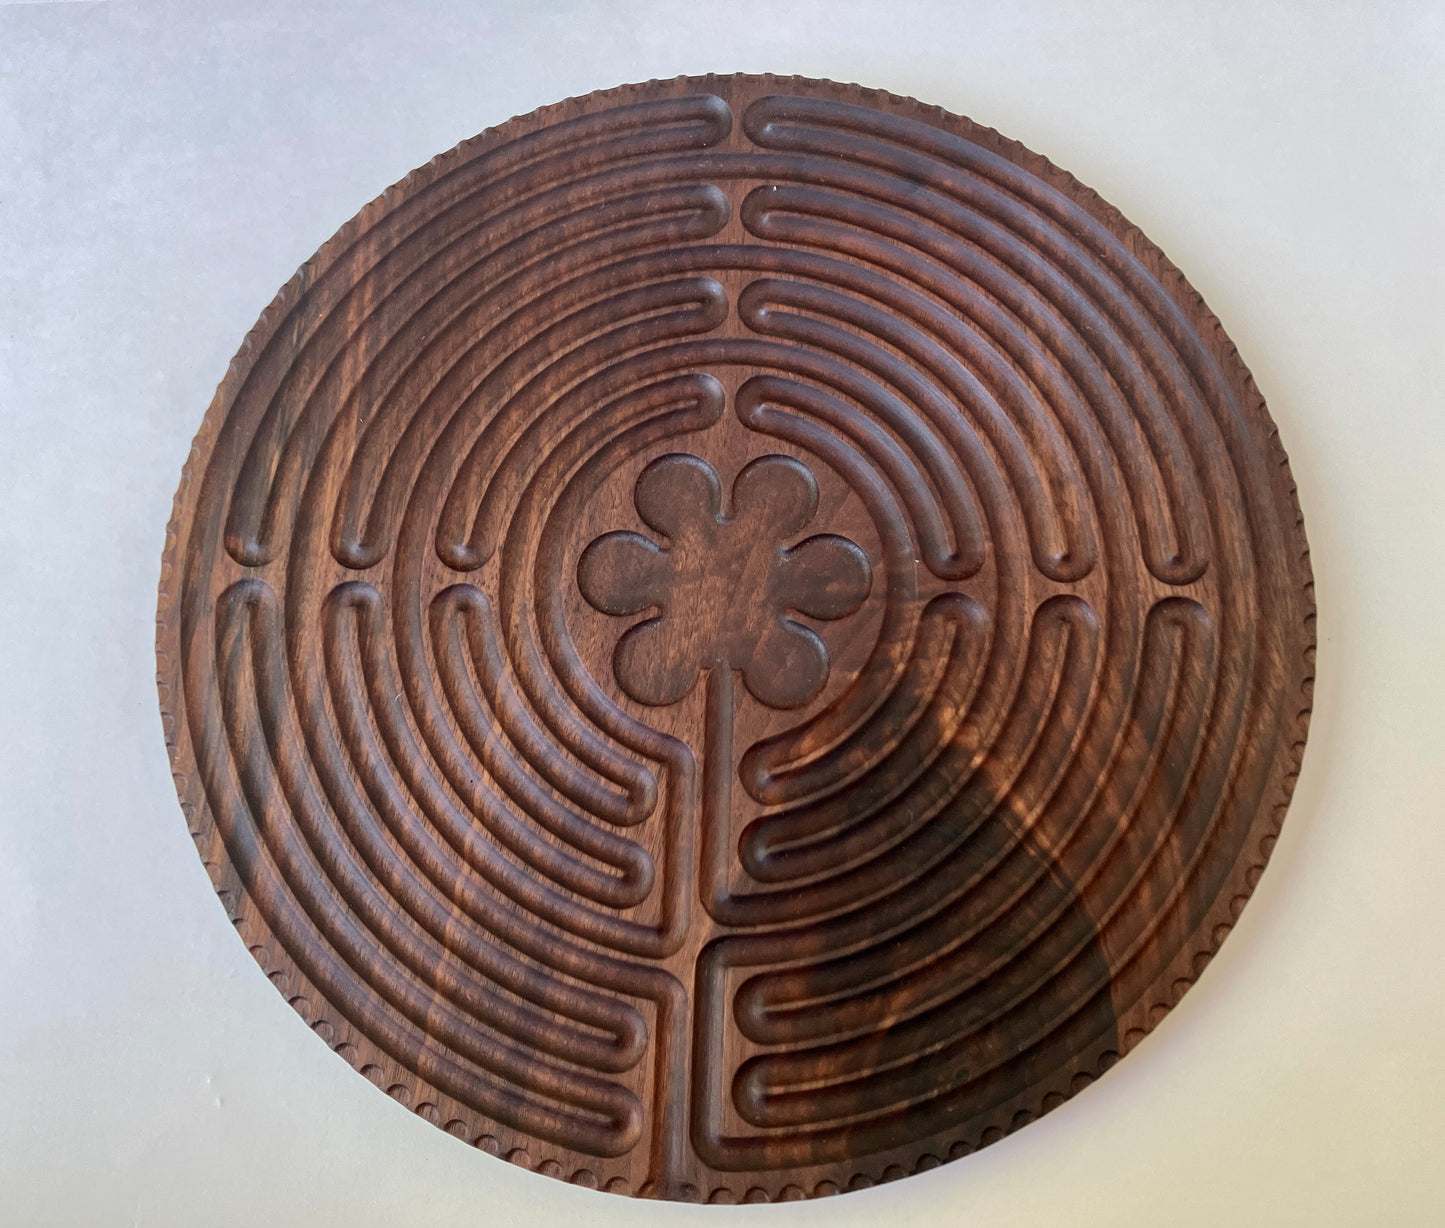 Extra Large 11-circuit Chartres-style Finger Labyrinth, Walnut Wood, 12.75" diameter